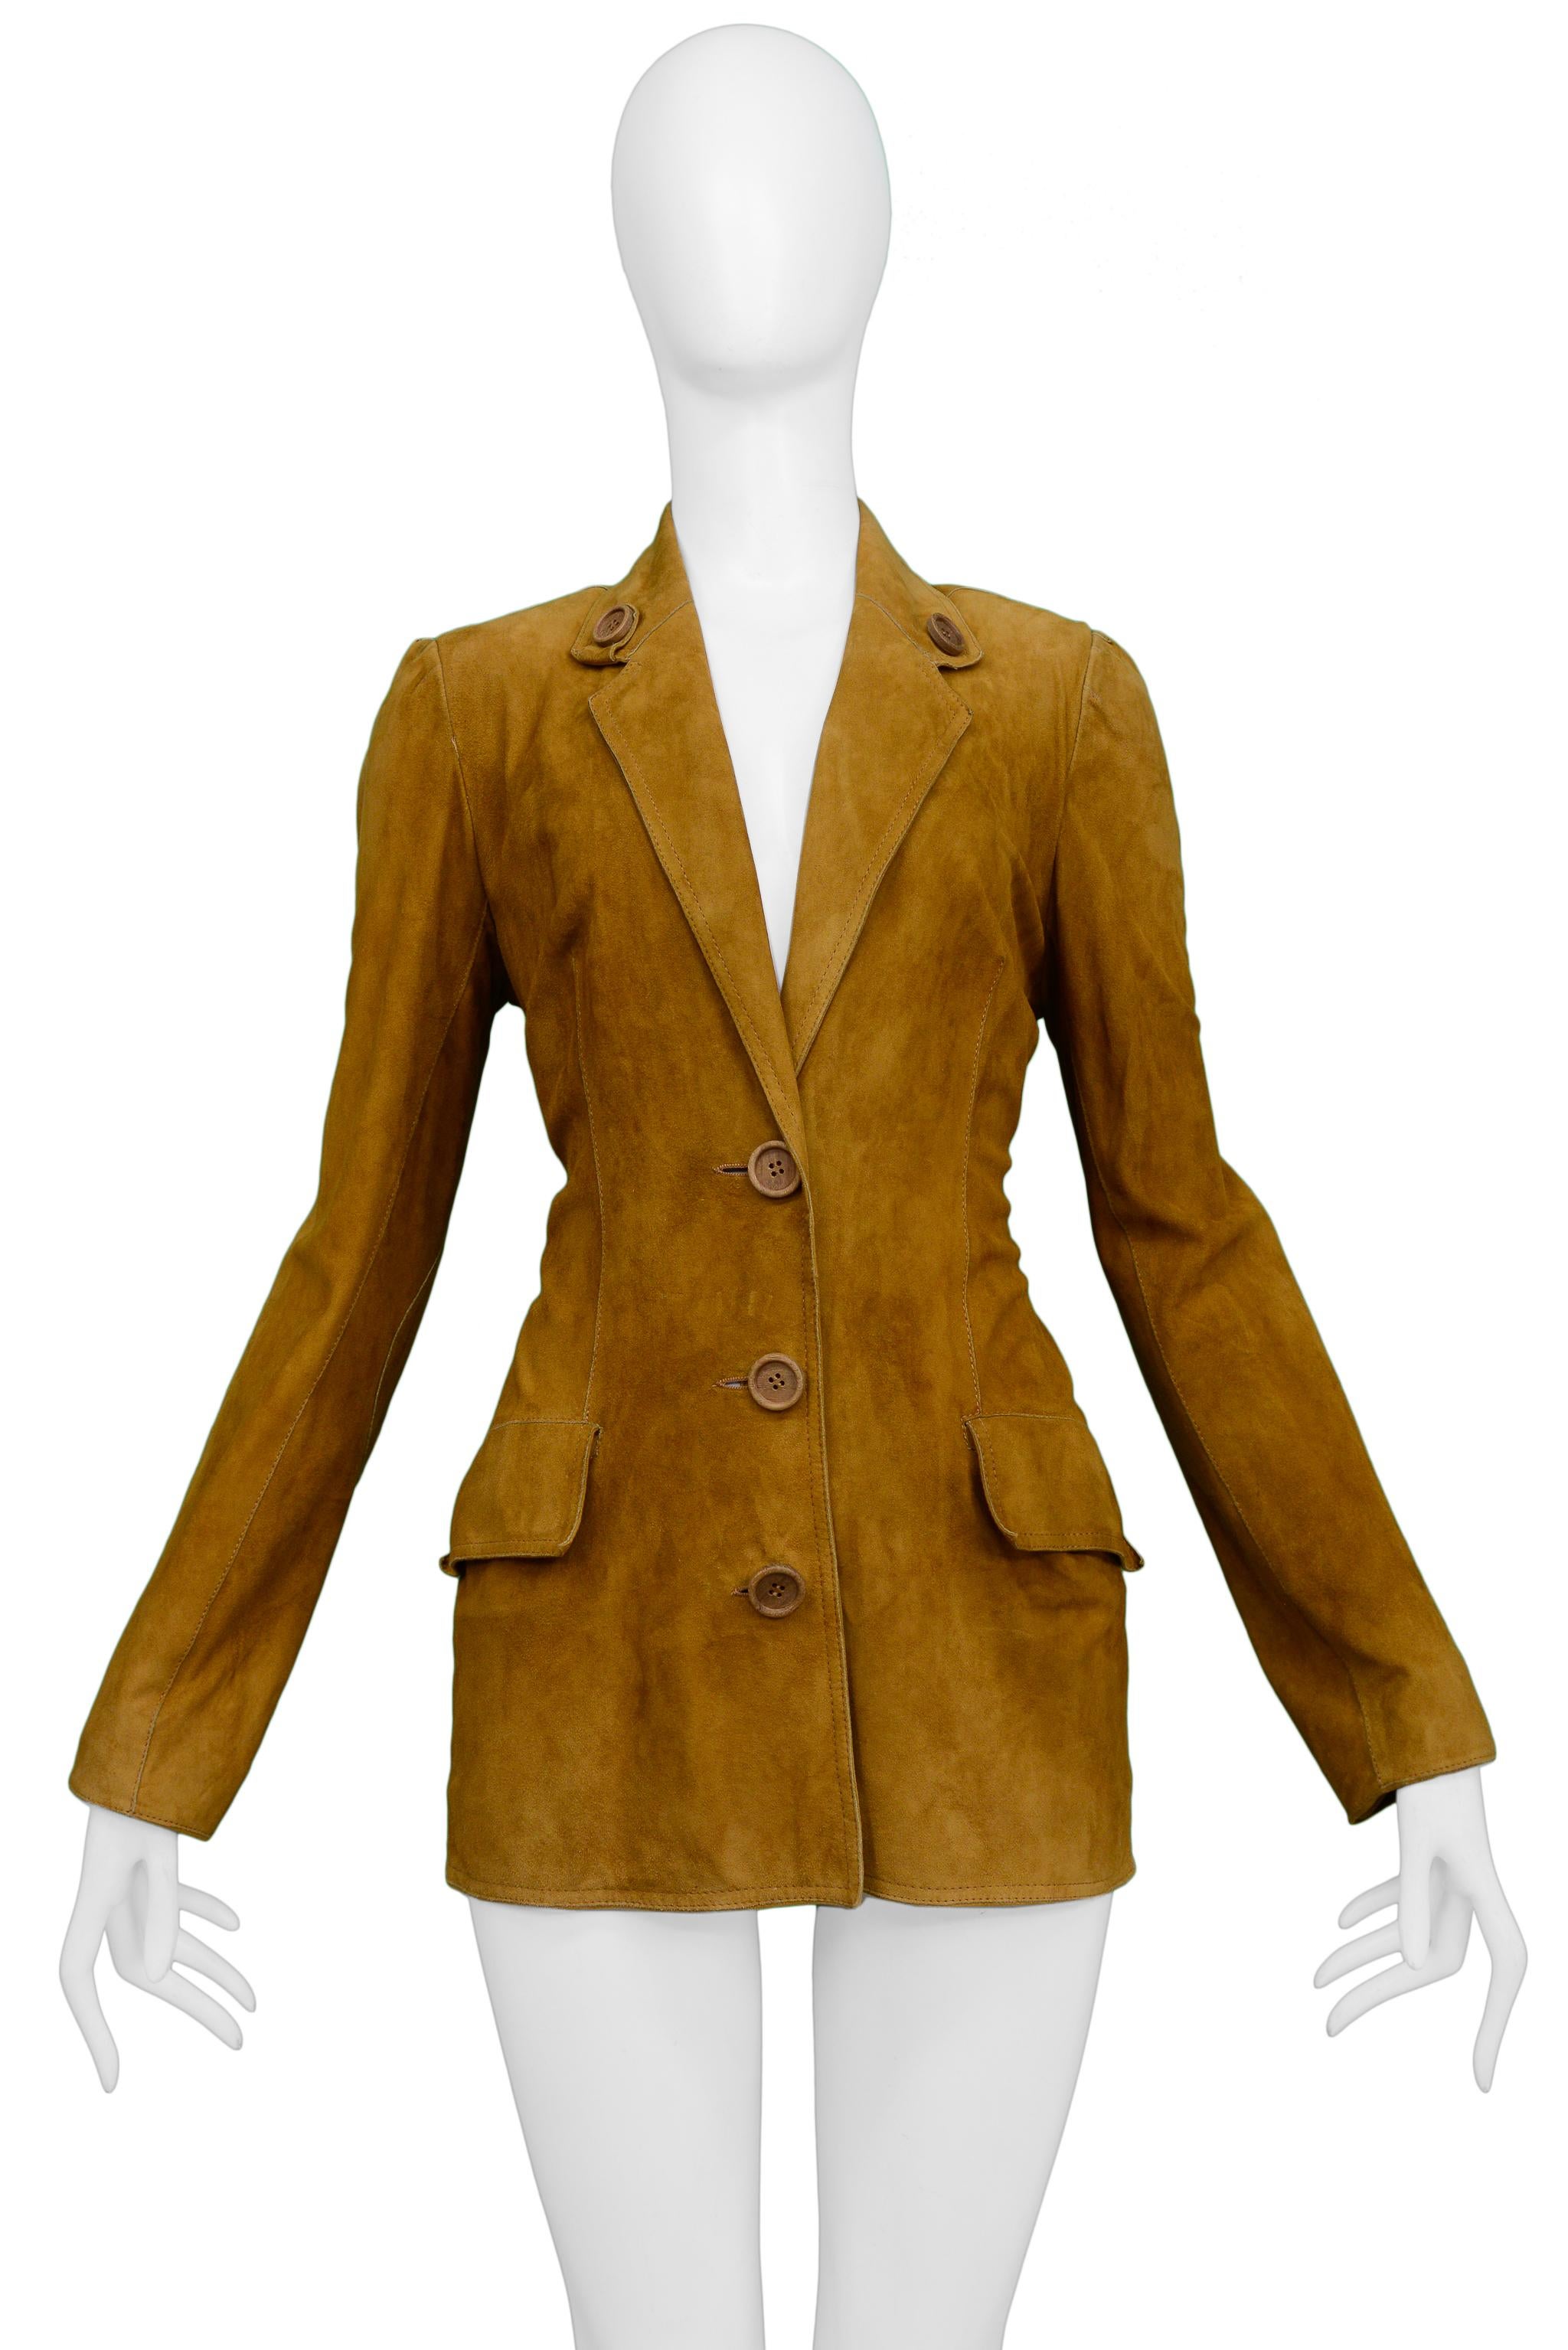 Resurrection Vintage is excited to offer a vintage Christian Dior by John Galliano brown goat suede jacket featuring a chic button-down lapel, side pockets with flaps, tailored body and three-button center front closure.

Christian Dior
Designed By